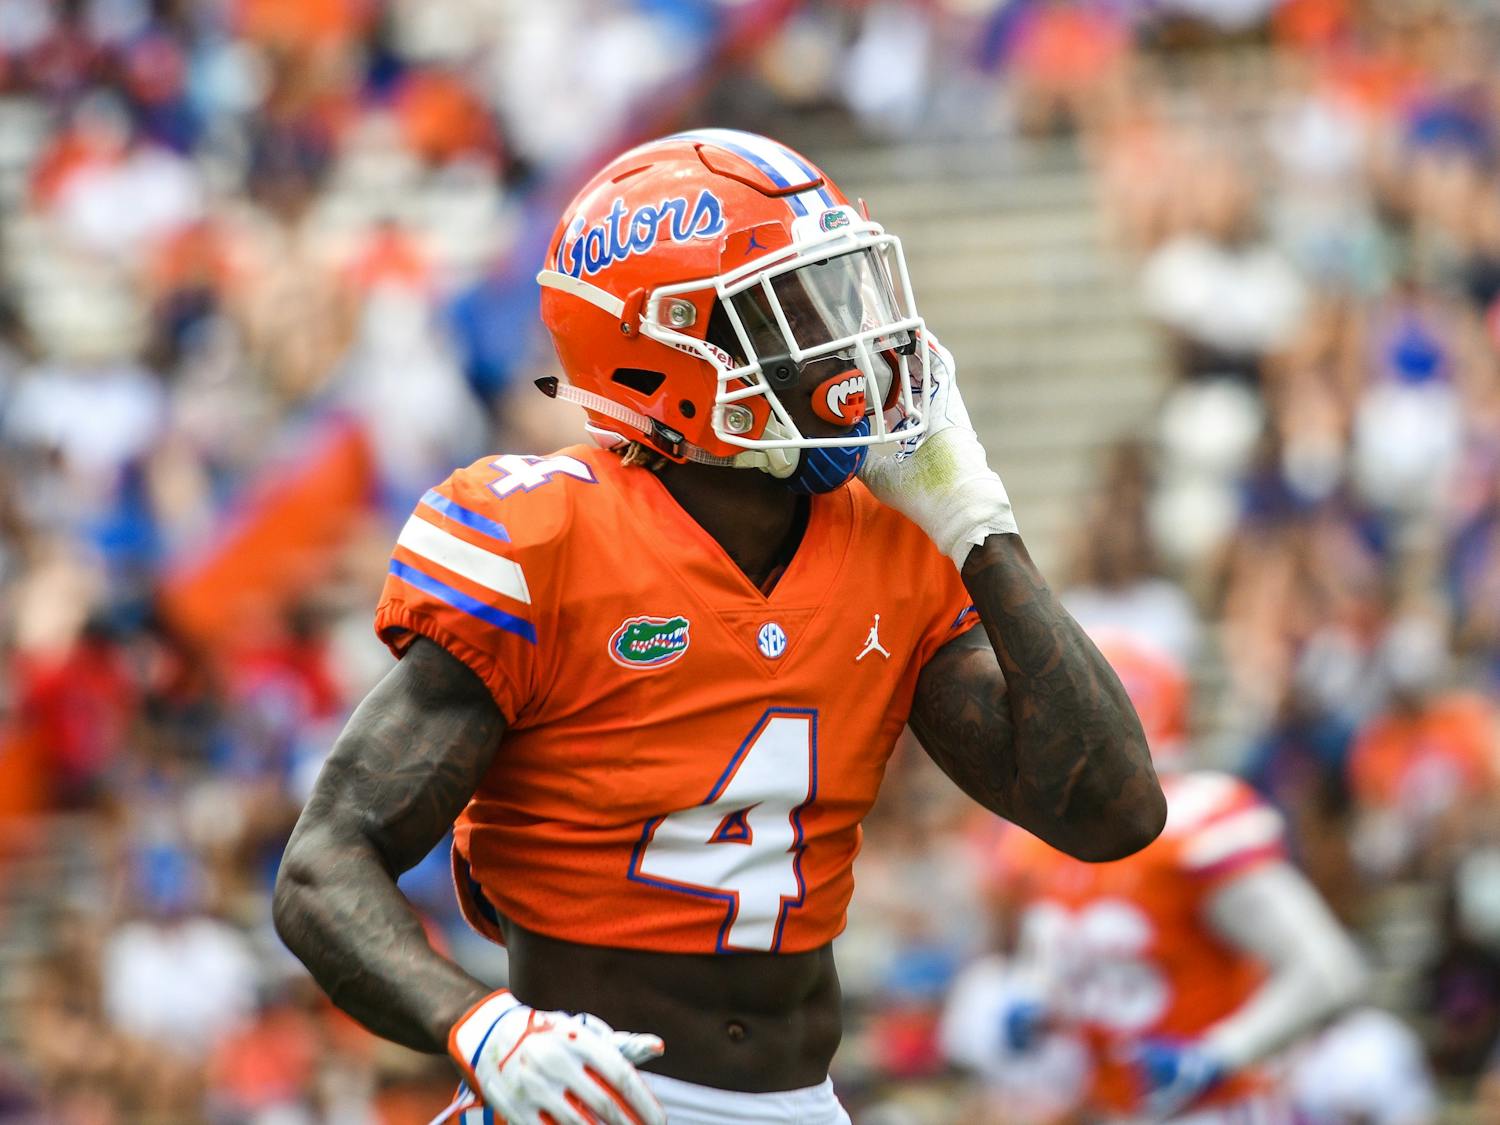 The first play of the Gators' Orange and Blue game Saturday was a double-reverse pass from receiver Kadarius Toney (pictured) to quarterback Feleipe Franks for a 40-yard gain. 